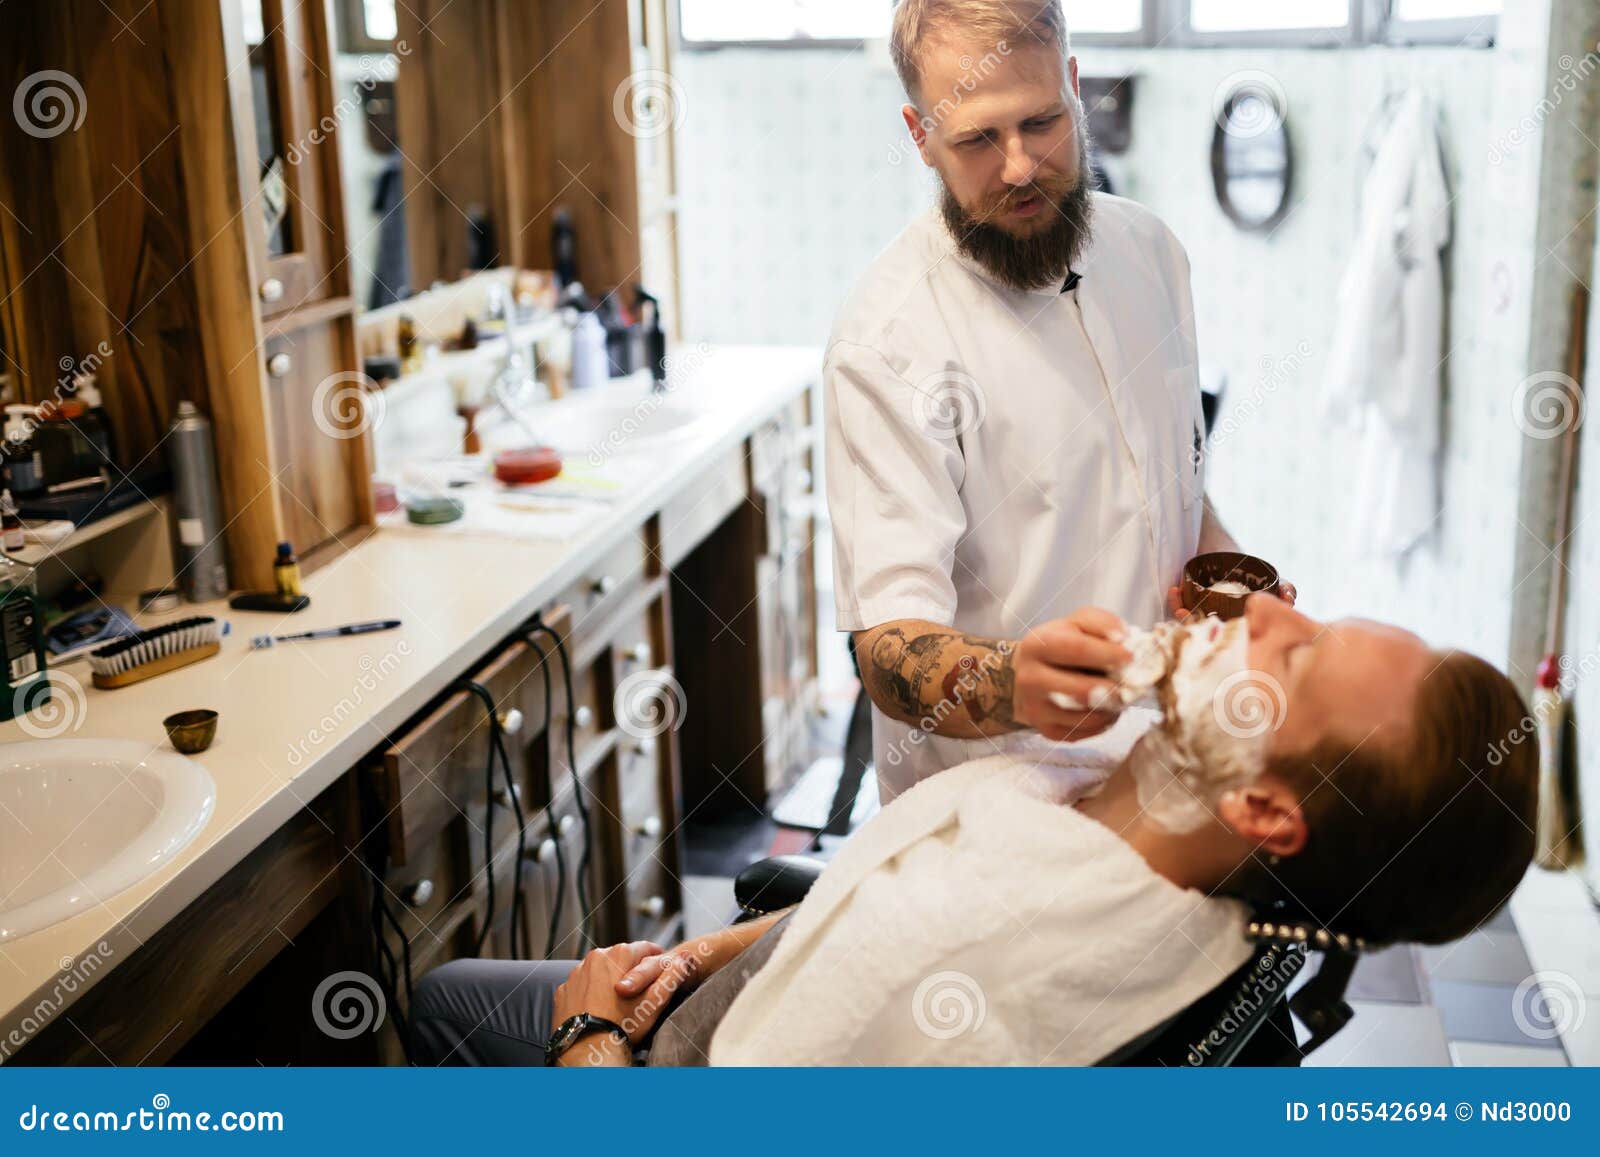 Male in barber shop stock photo. Image of adult, comb - 105542694